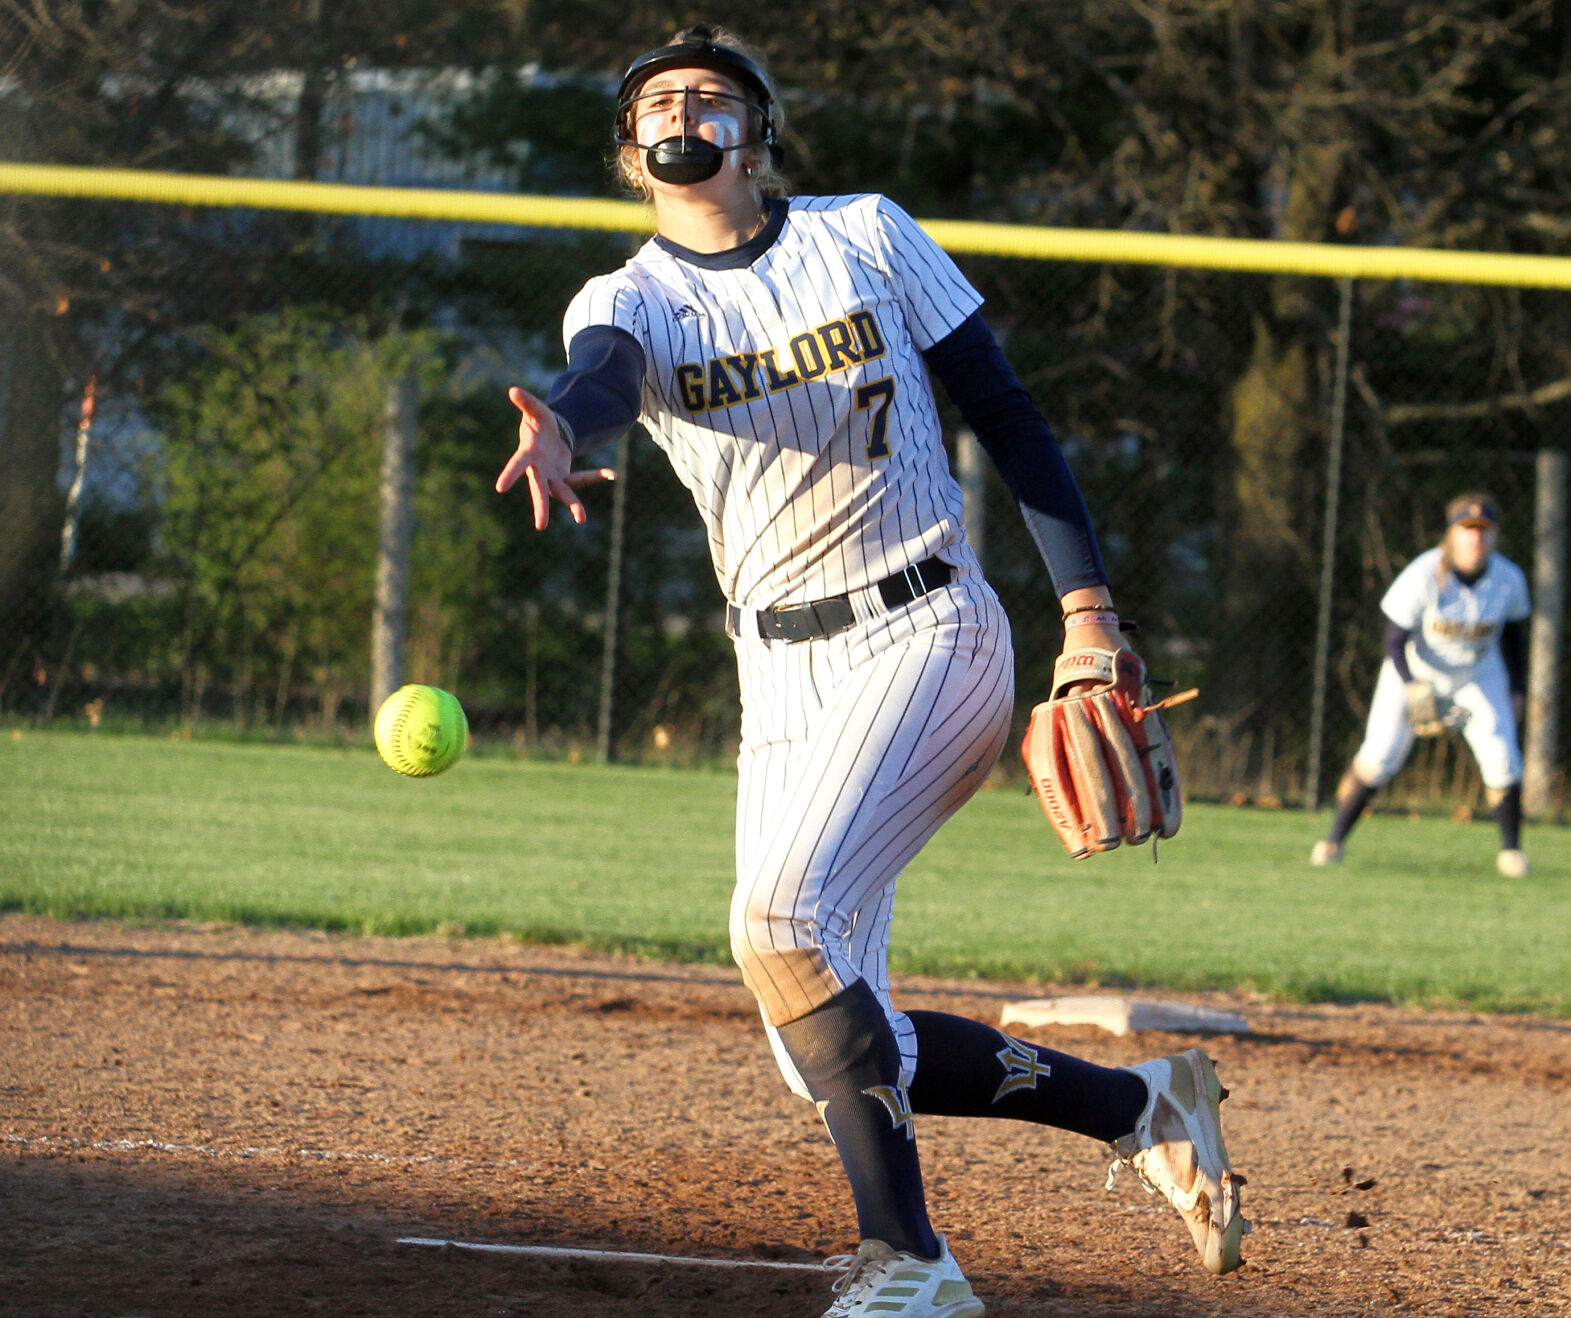 Gaylord Softball Dominates Regionals: Success for Gaylord Blue Devils and TC Central’s Historic Run